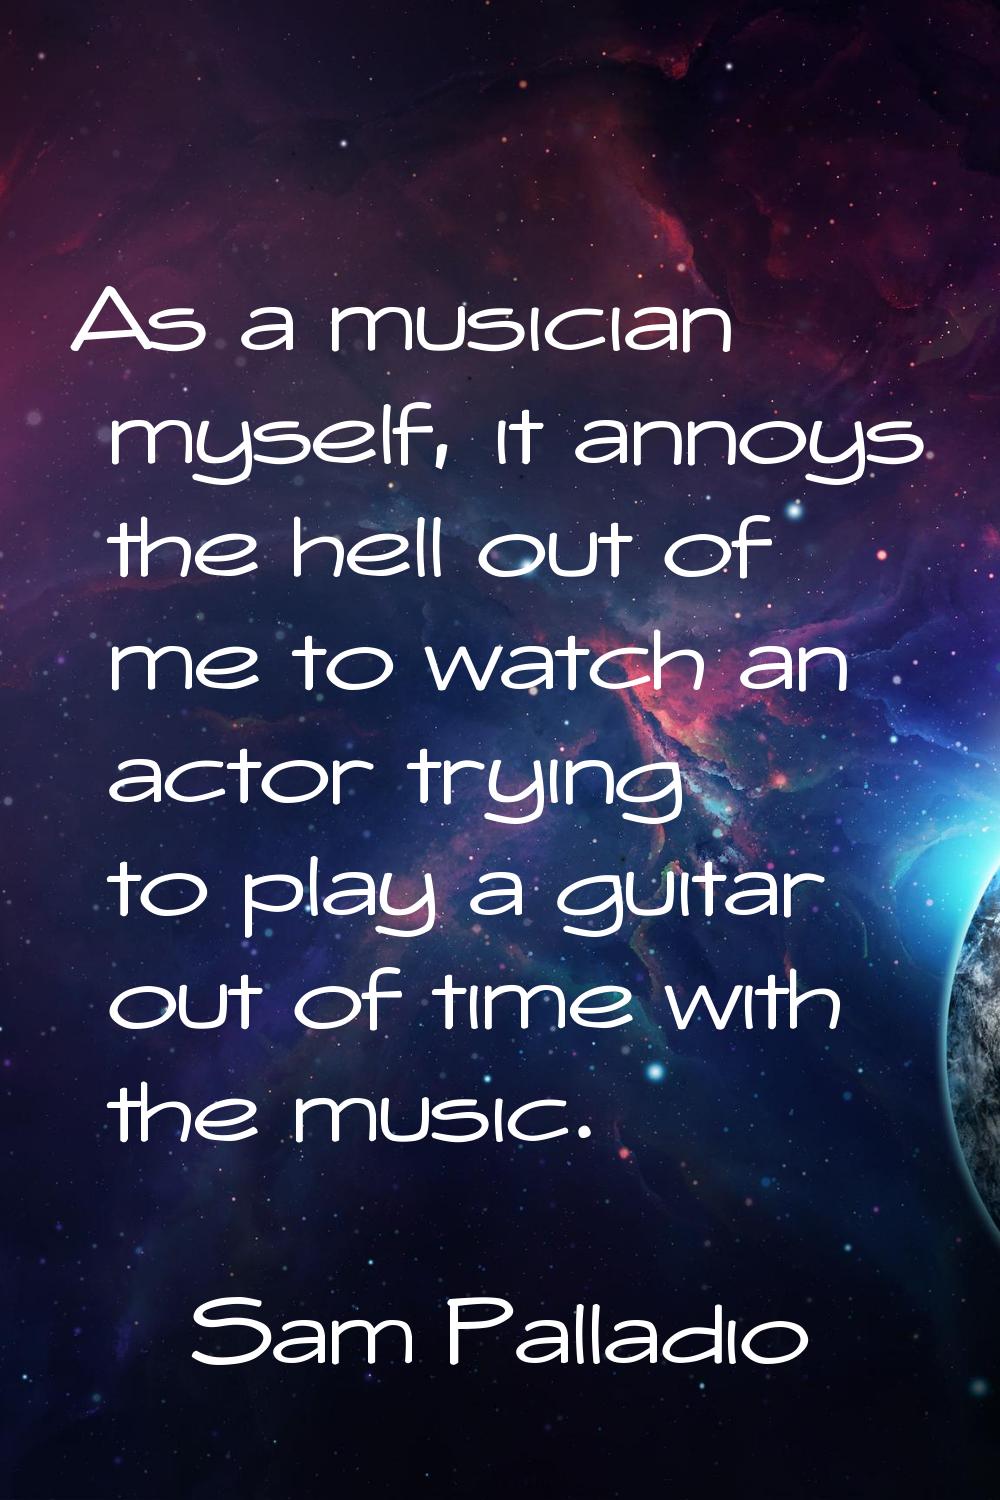 As a musician myself, it annoys the hell out of me to watch an actor trying to play a guitar out of